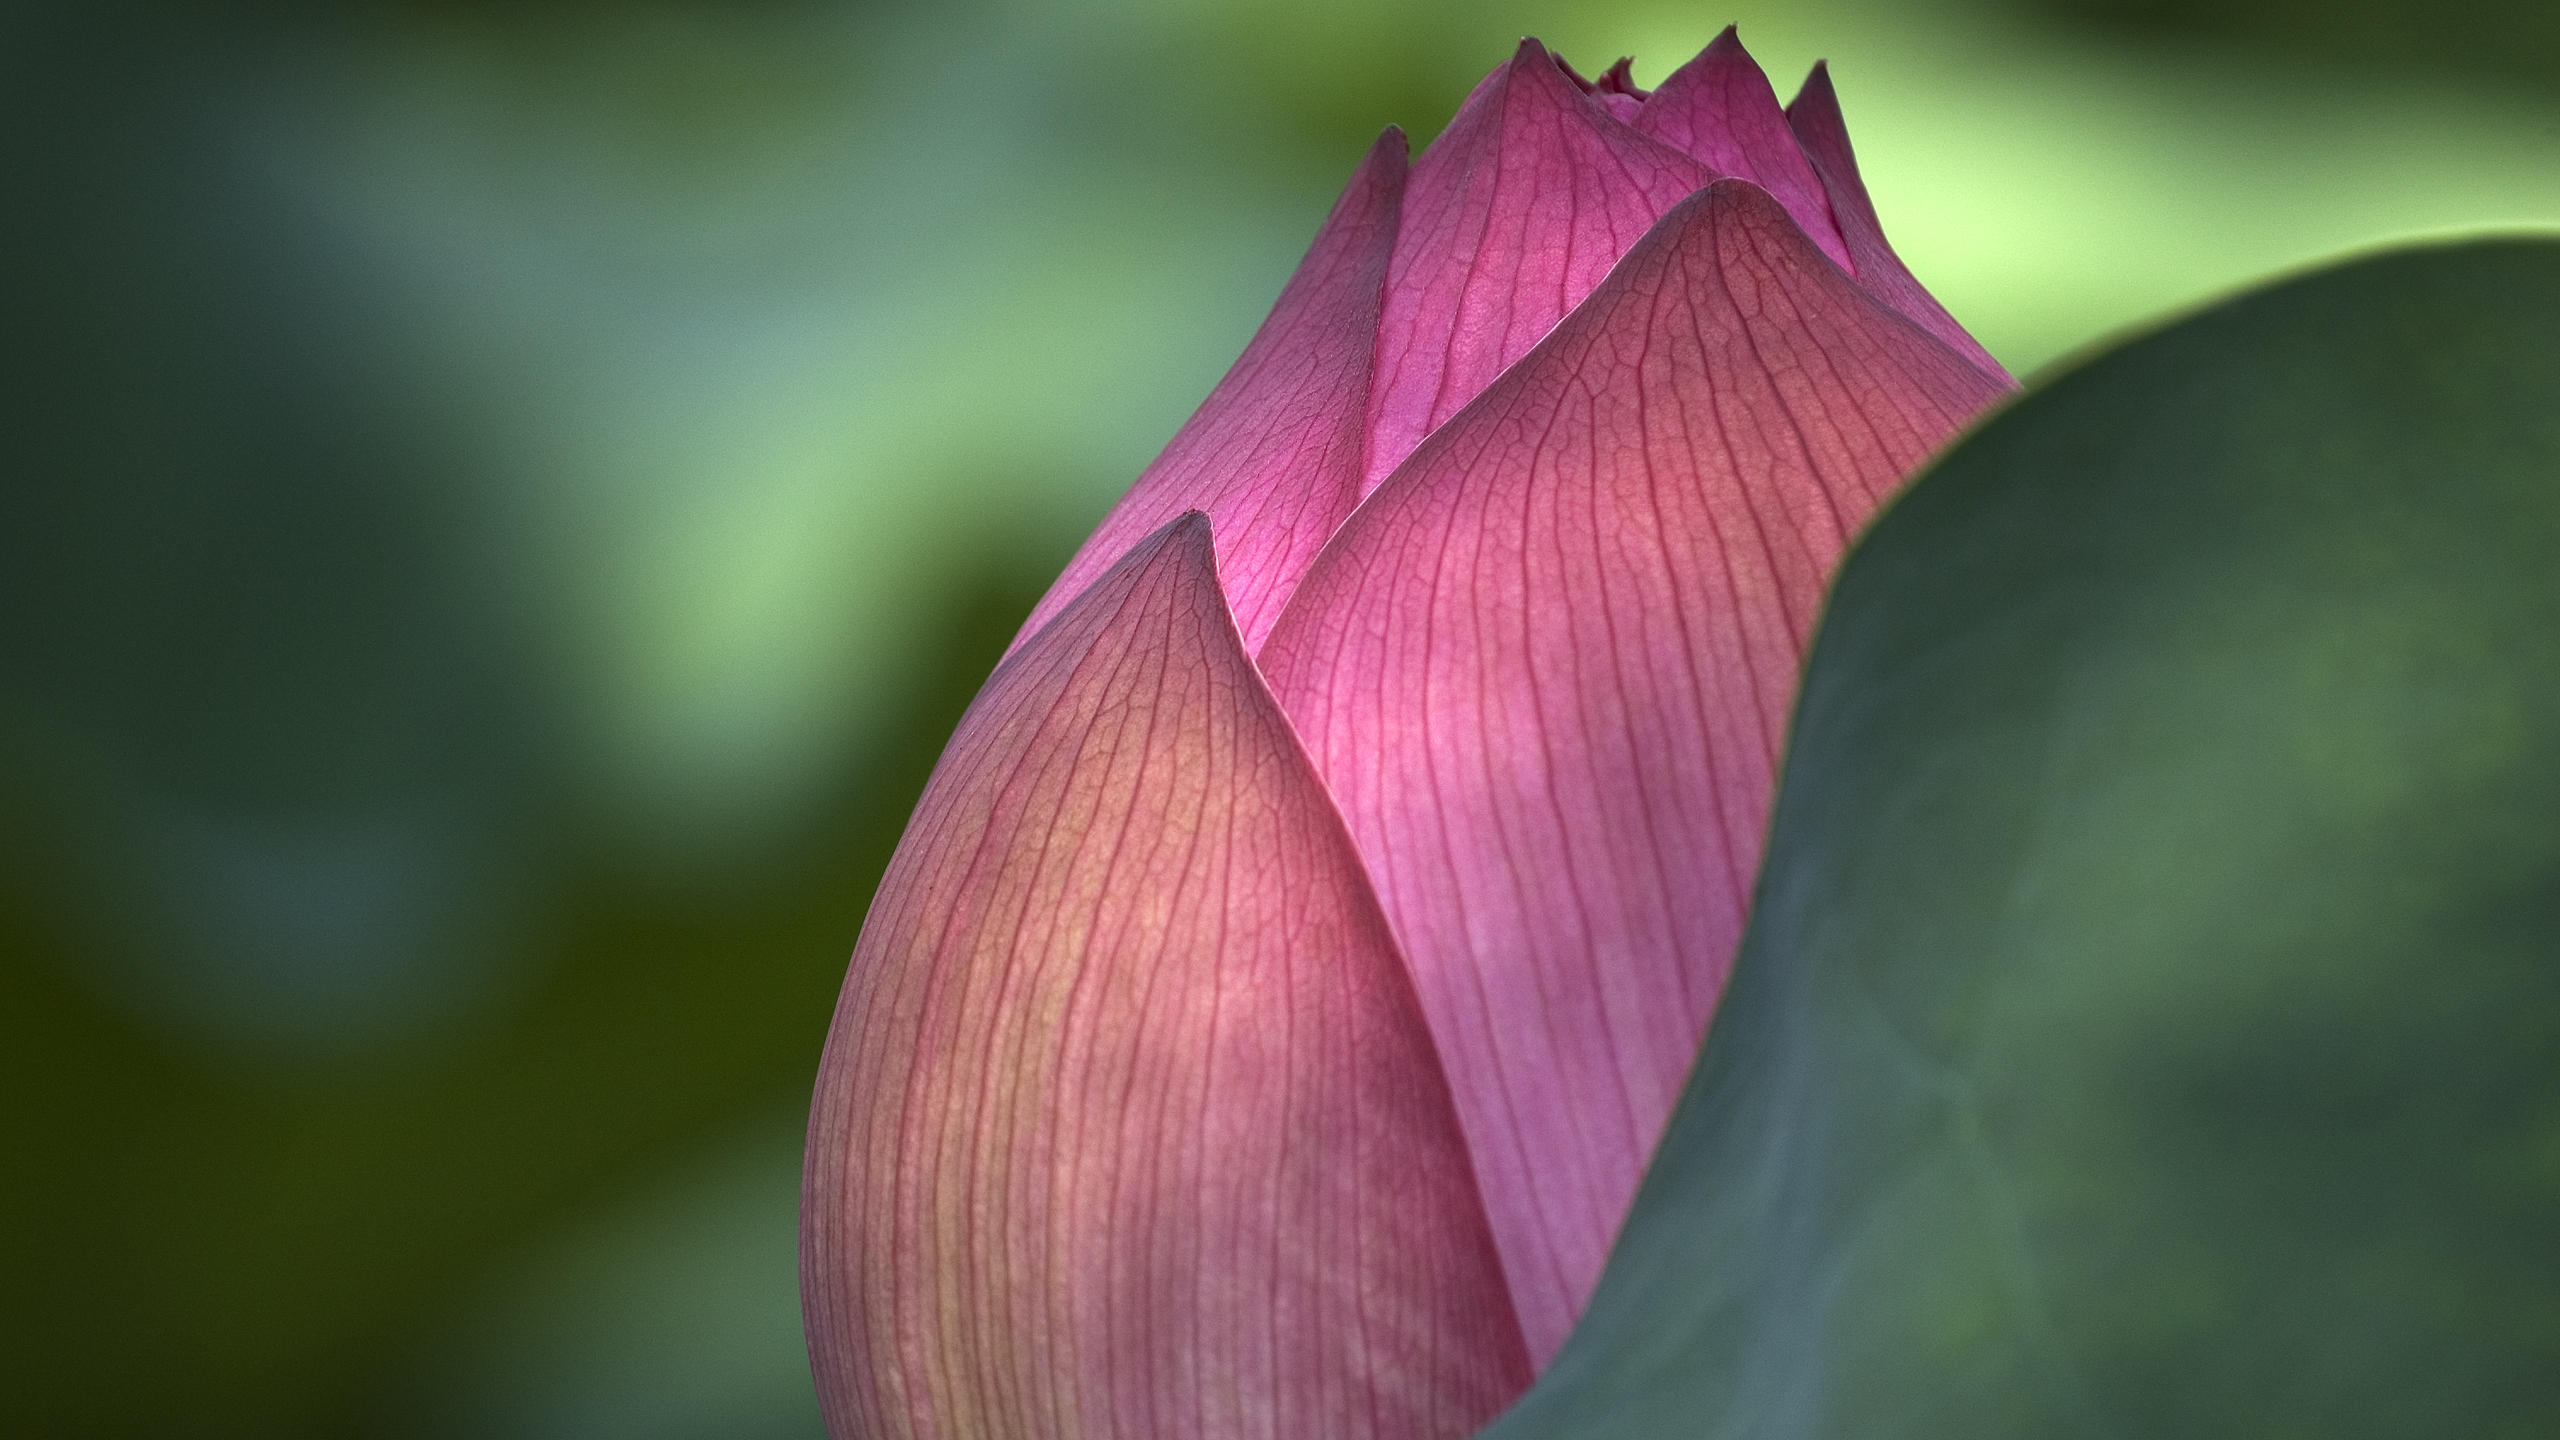 Technology Abstract Lotus Flower Iphone Ipad Mac At - Amazing Photos In Hd , HD Wallpaper & Backgrounds